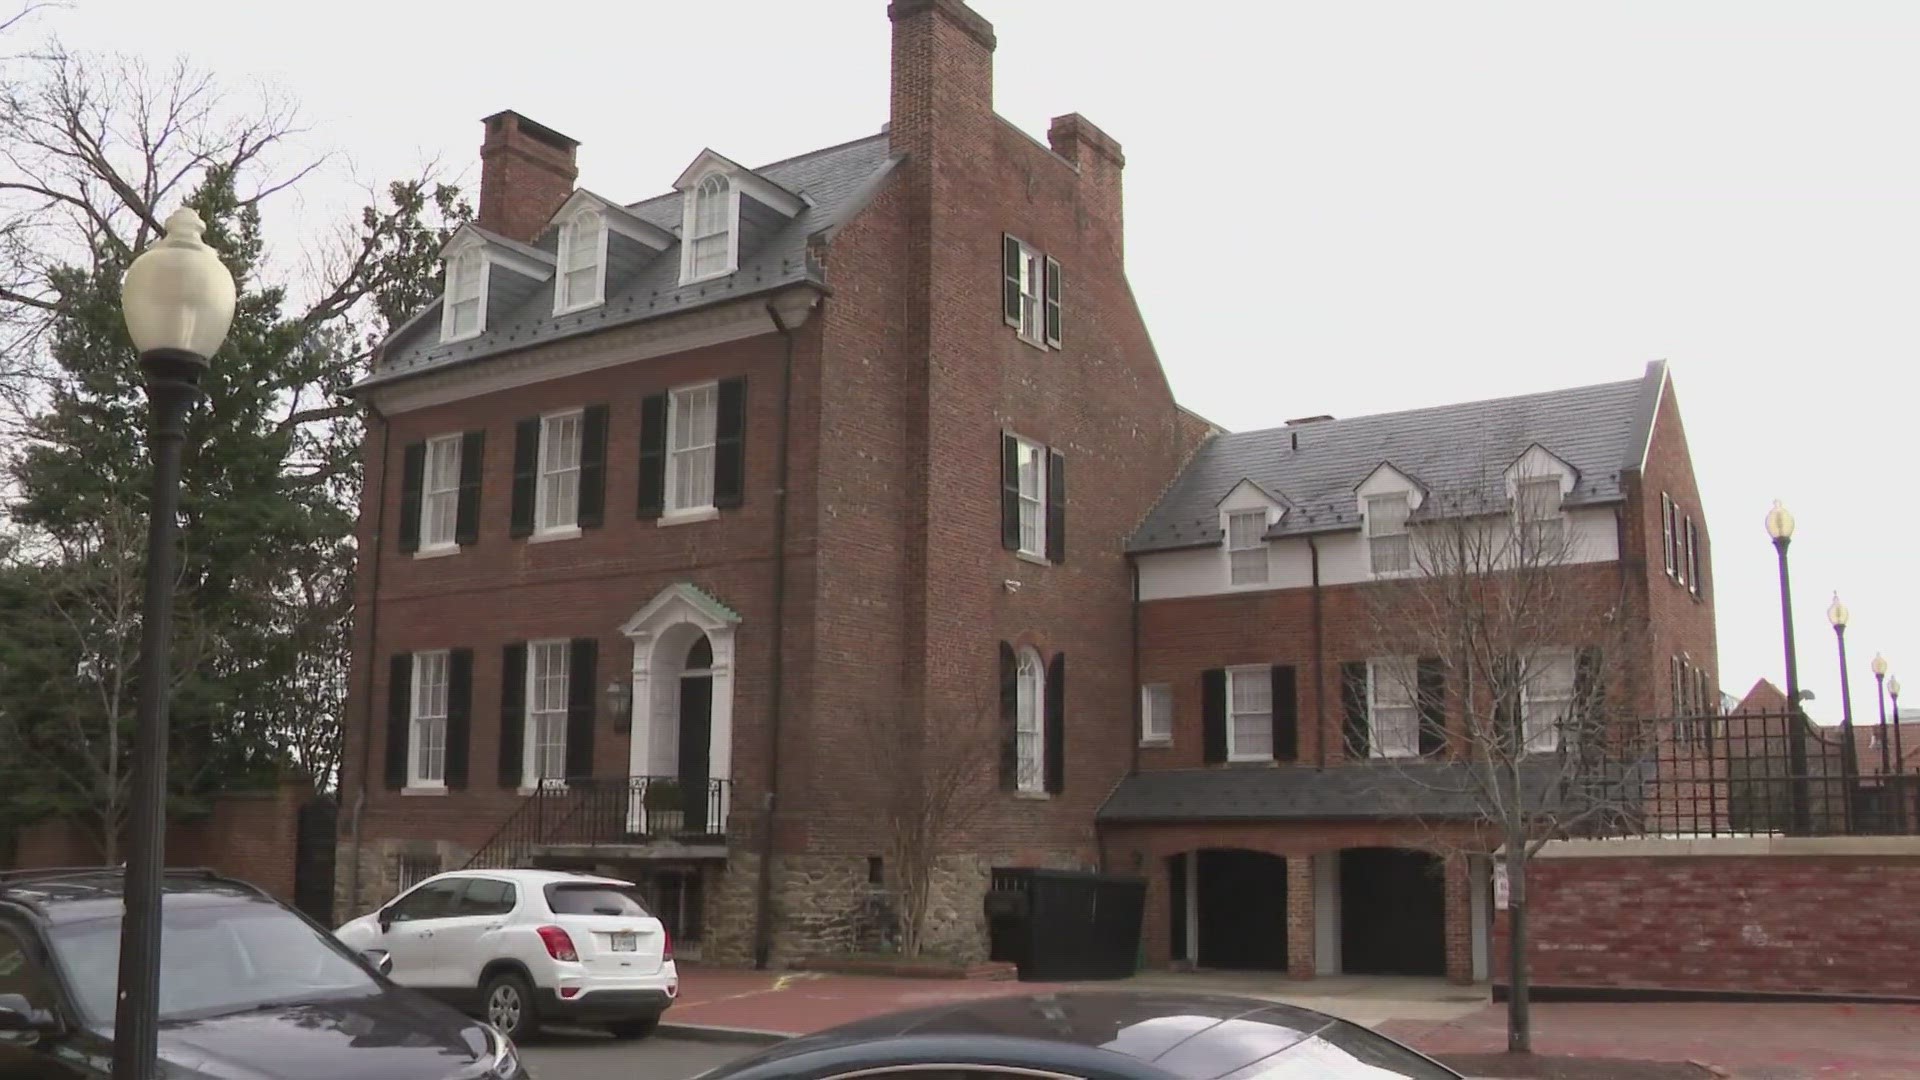 It's reportedly the 4th oldest house in D.C.